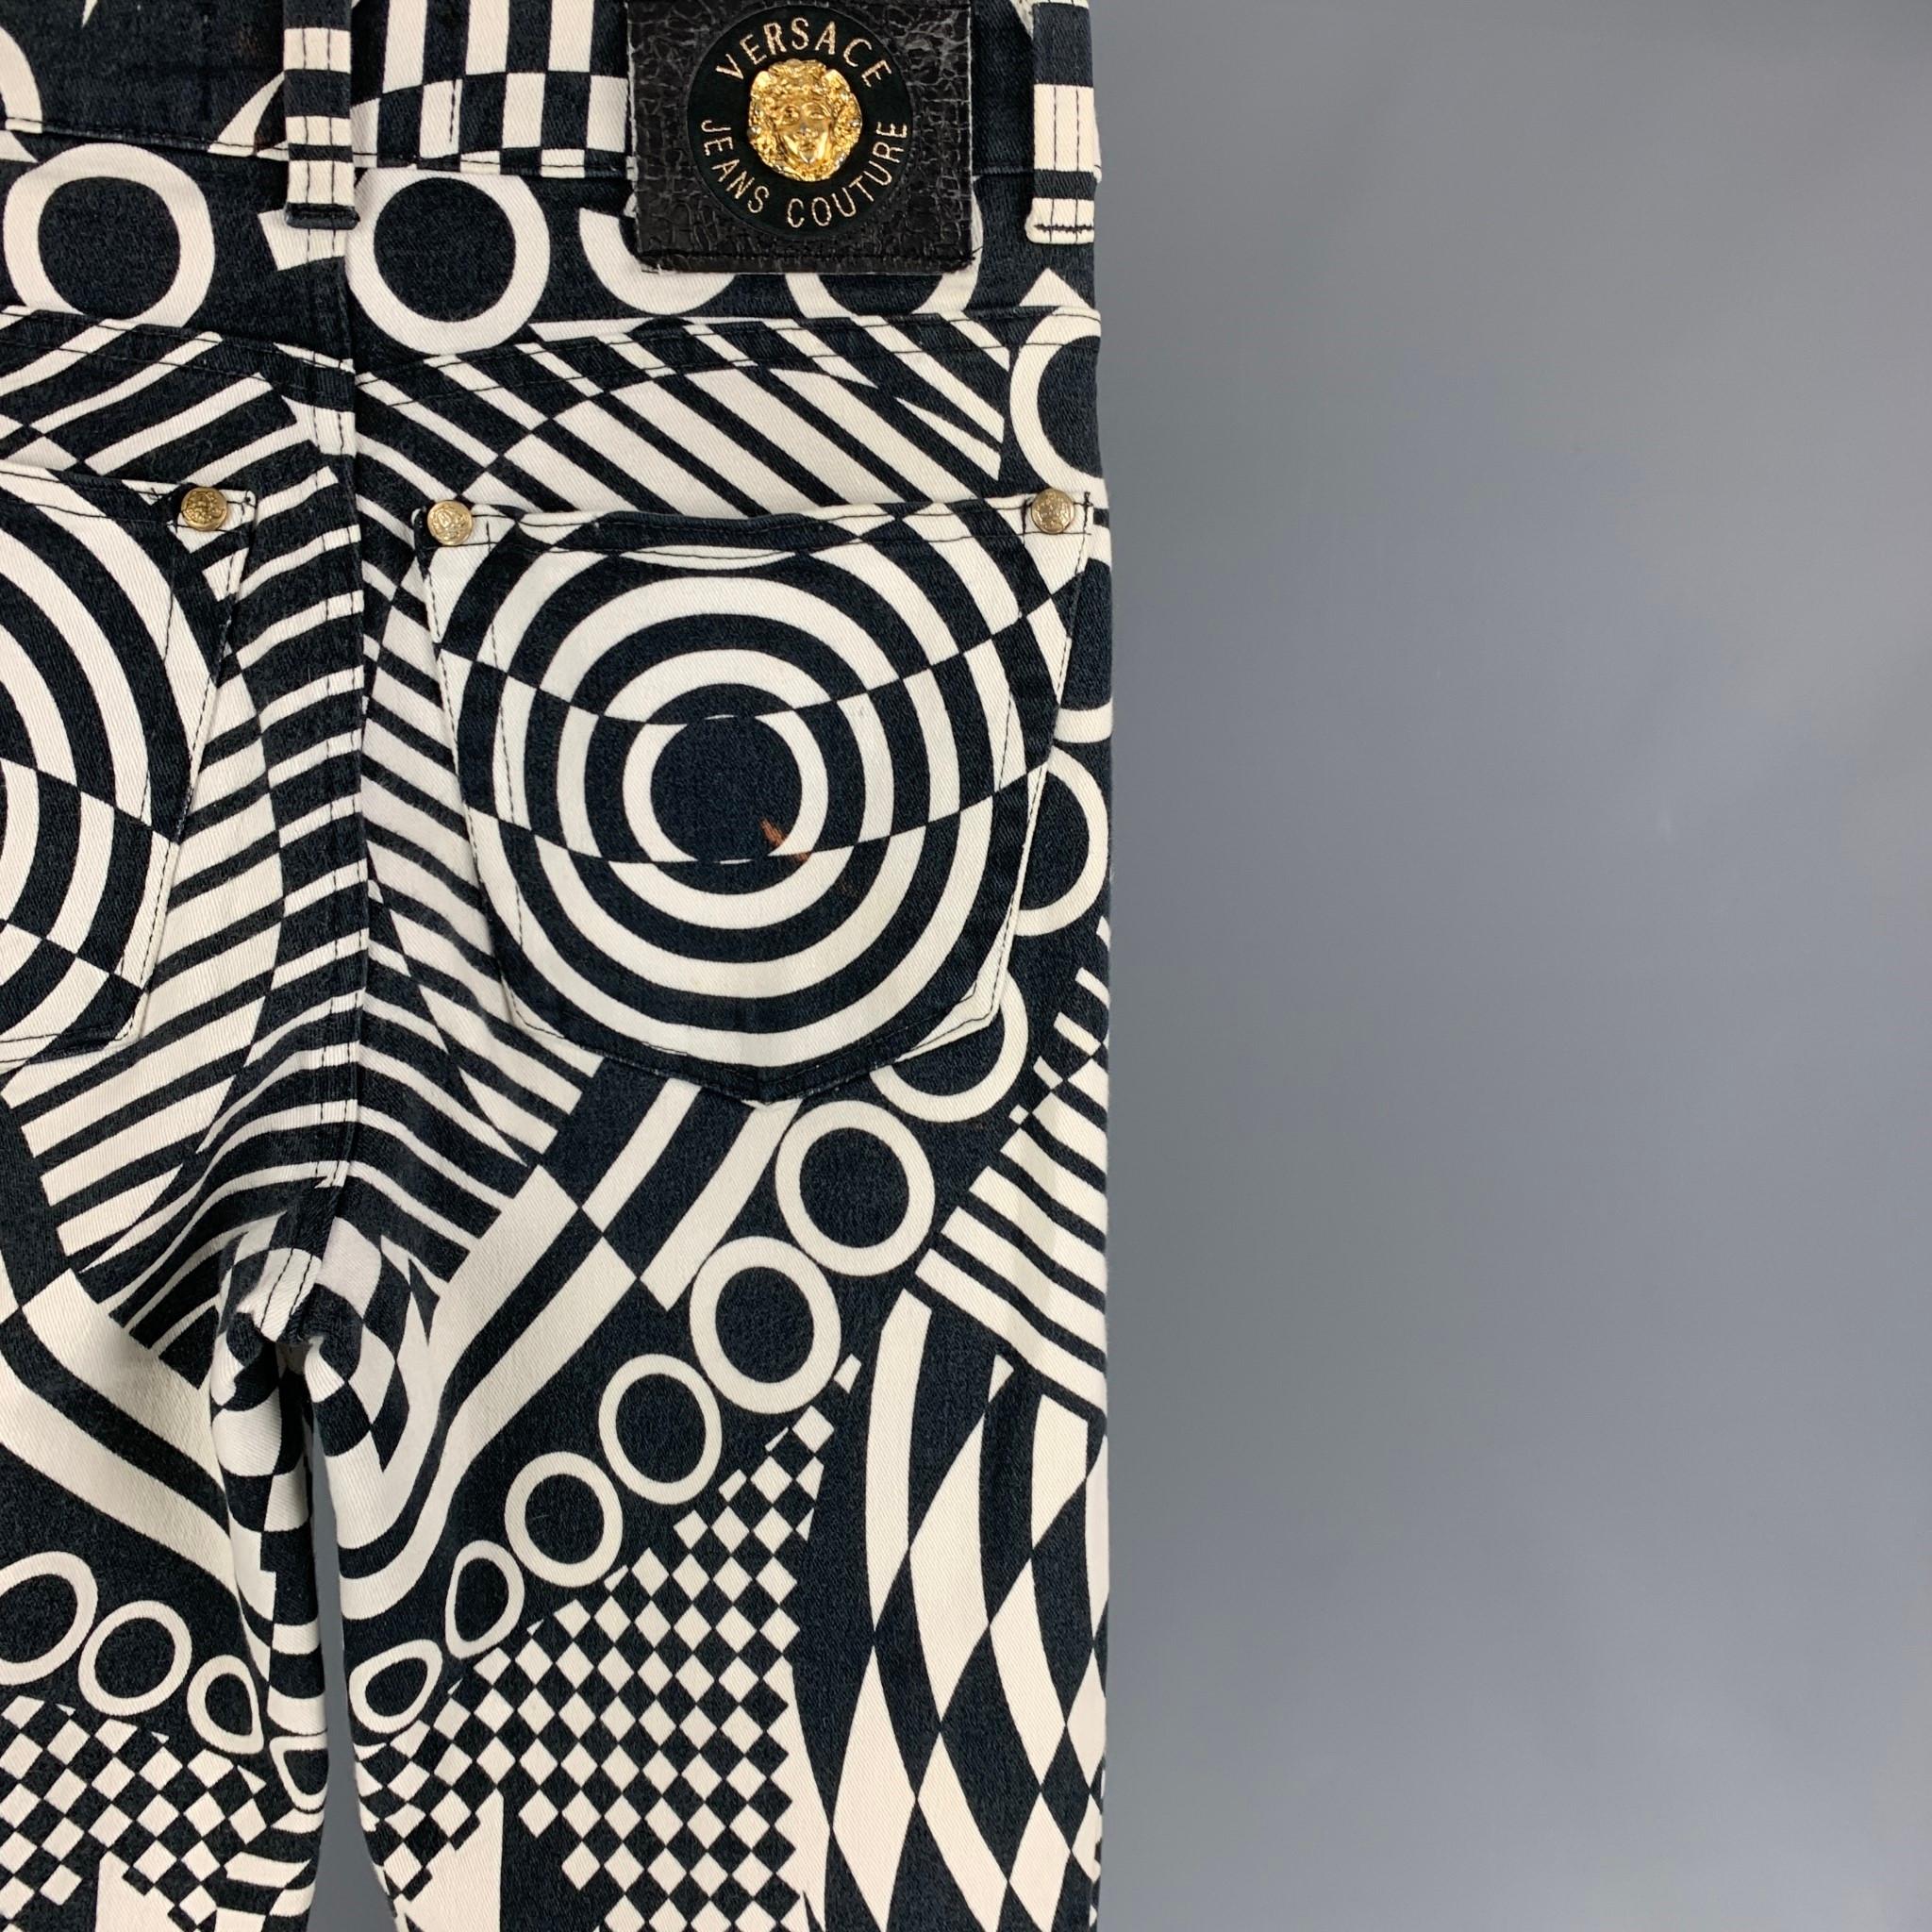 Vintage VERSACE JEANS COUTURE pants comes in a white & black abstract print cotton featuring a skinny fit, gold tone medusa head buttons, and a zip fly closure. Made in Italy. 

Very Good Pre-Owned Condition. Light mark at back. As-Is.
Marked: